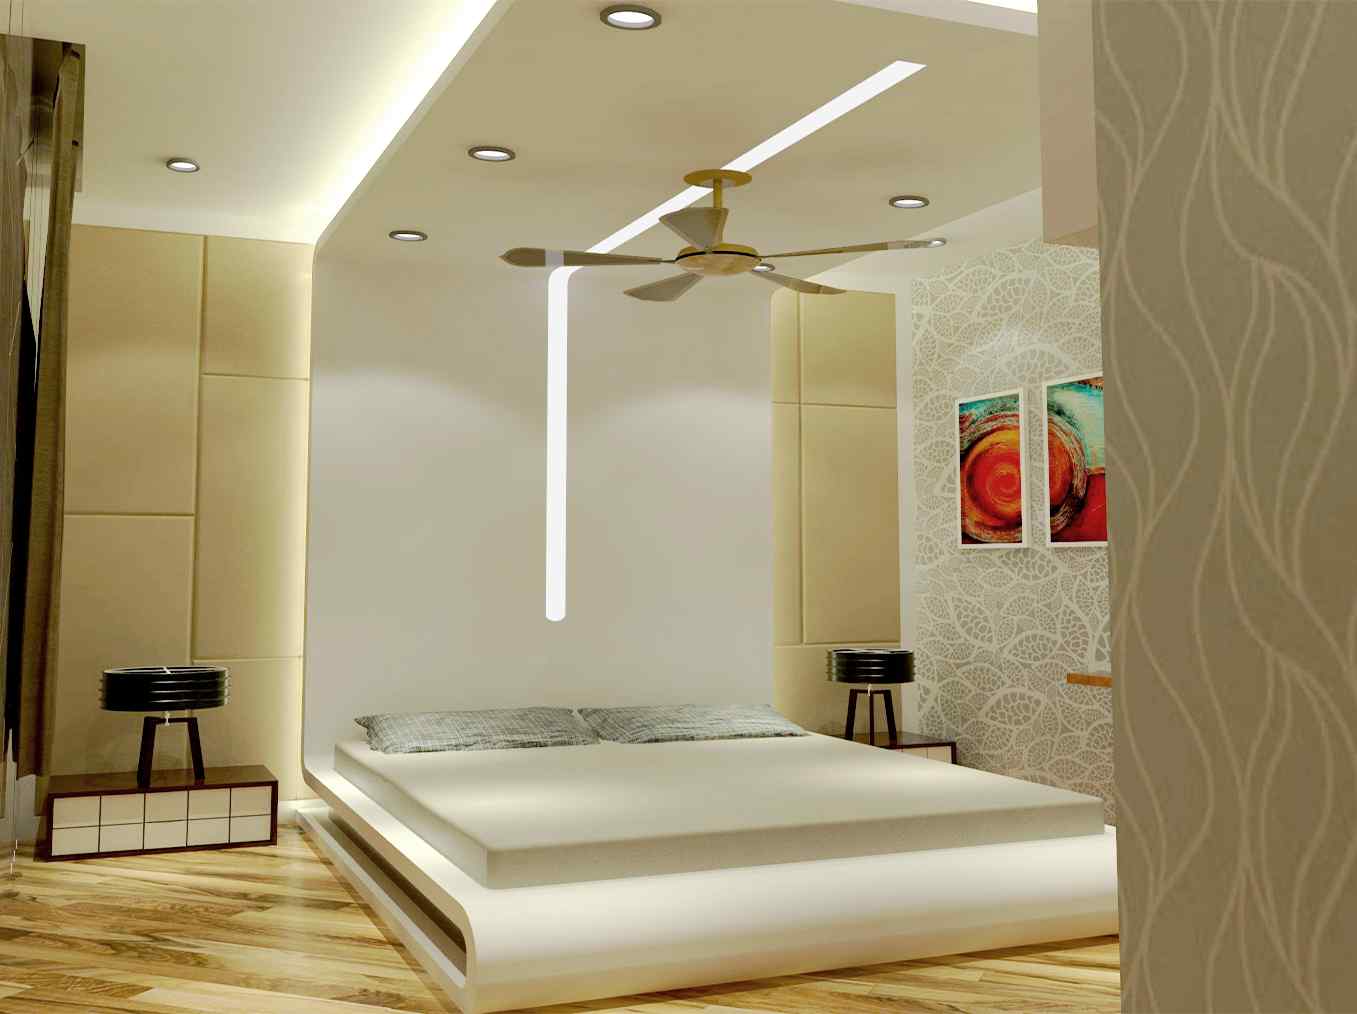 Small Bedroom Ceiling Designs Ideas That Will Never Go Out of Style